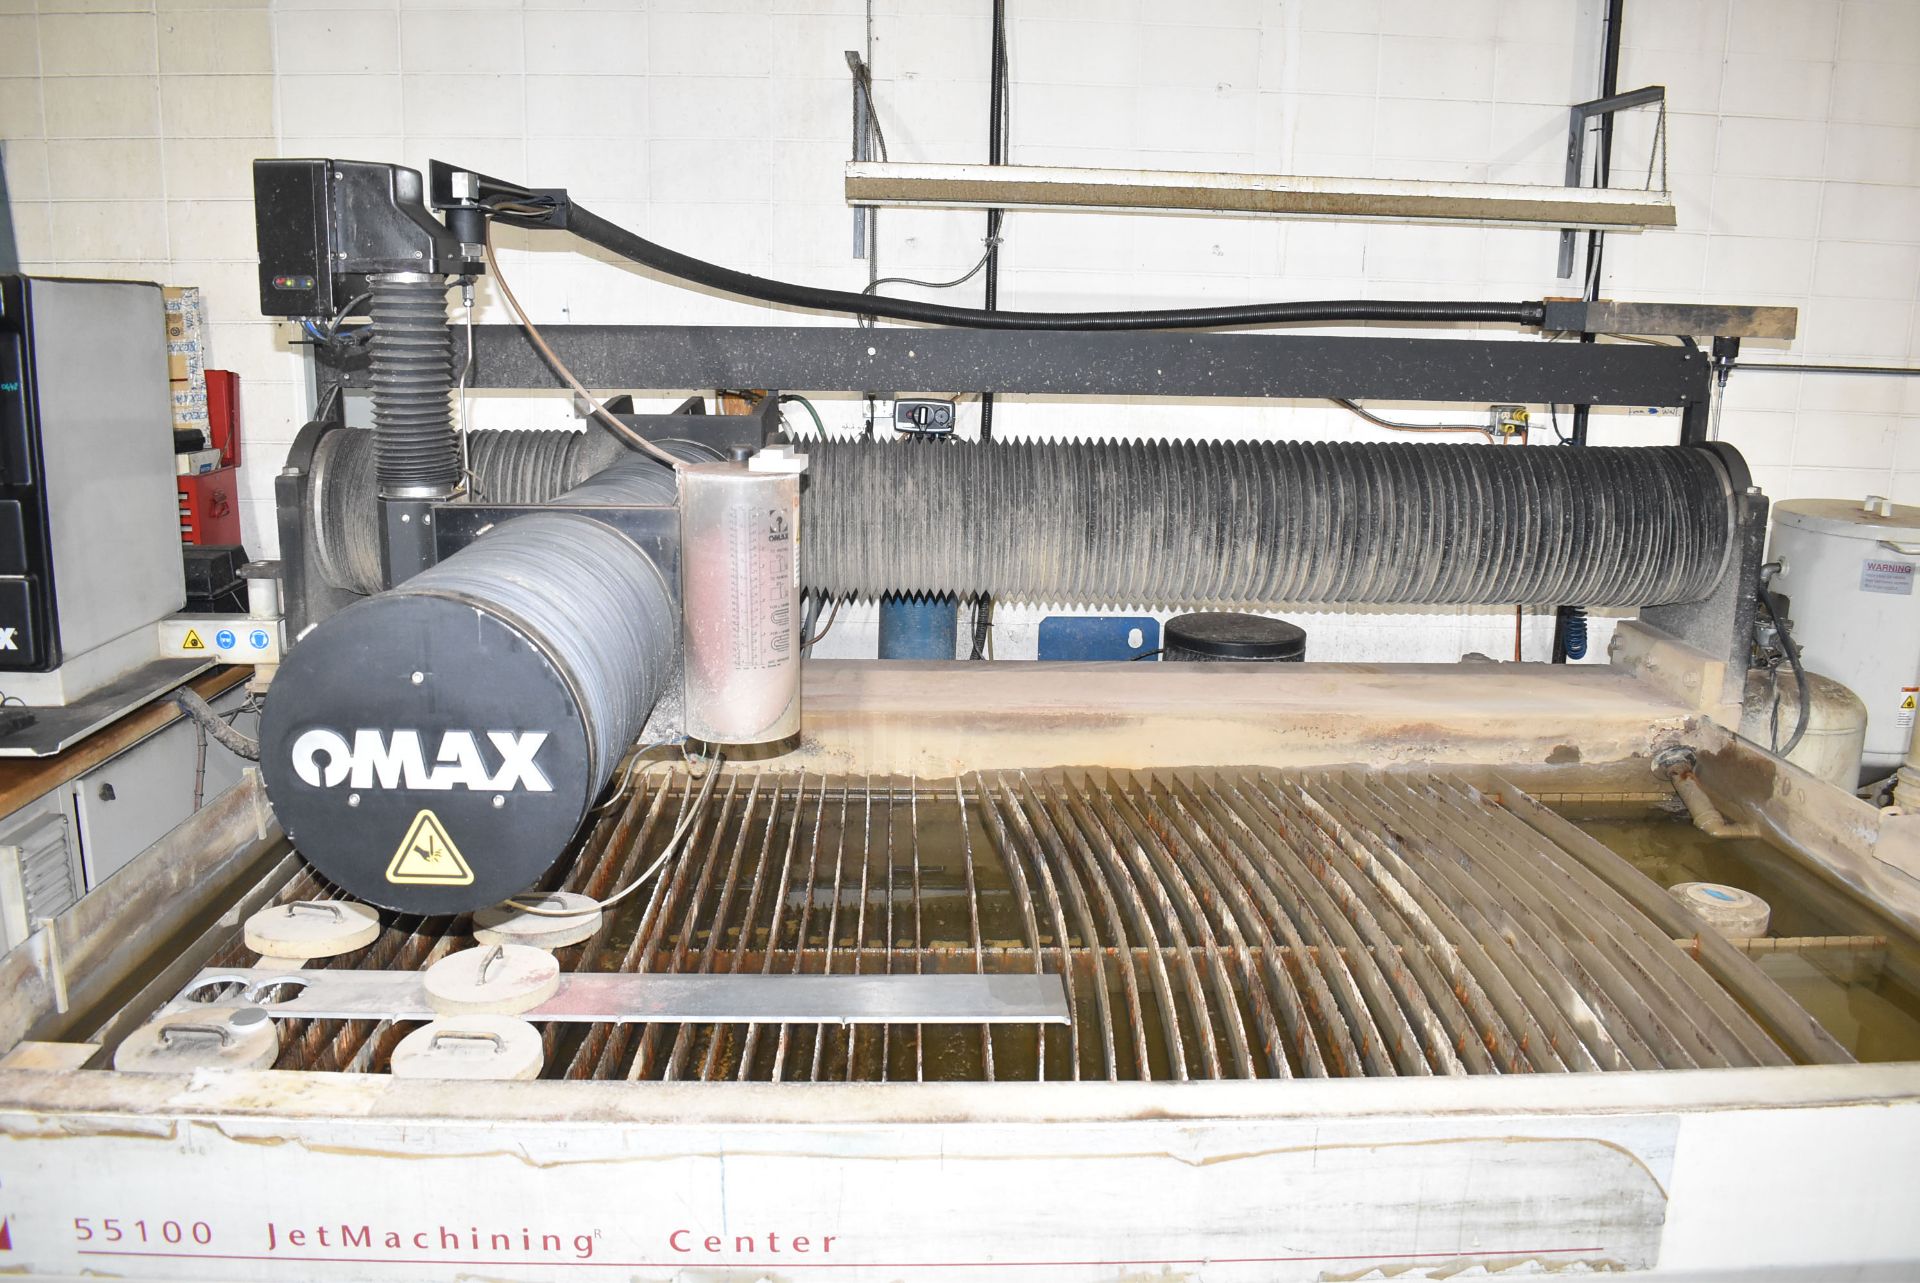 OMAX (2007) 55100 CNC WATERJET CUTTING SYSTEM WITH OMAX WINDOWS PC BASED CNC CONTROL, 55" X 100" - Image 11 of 20